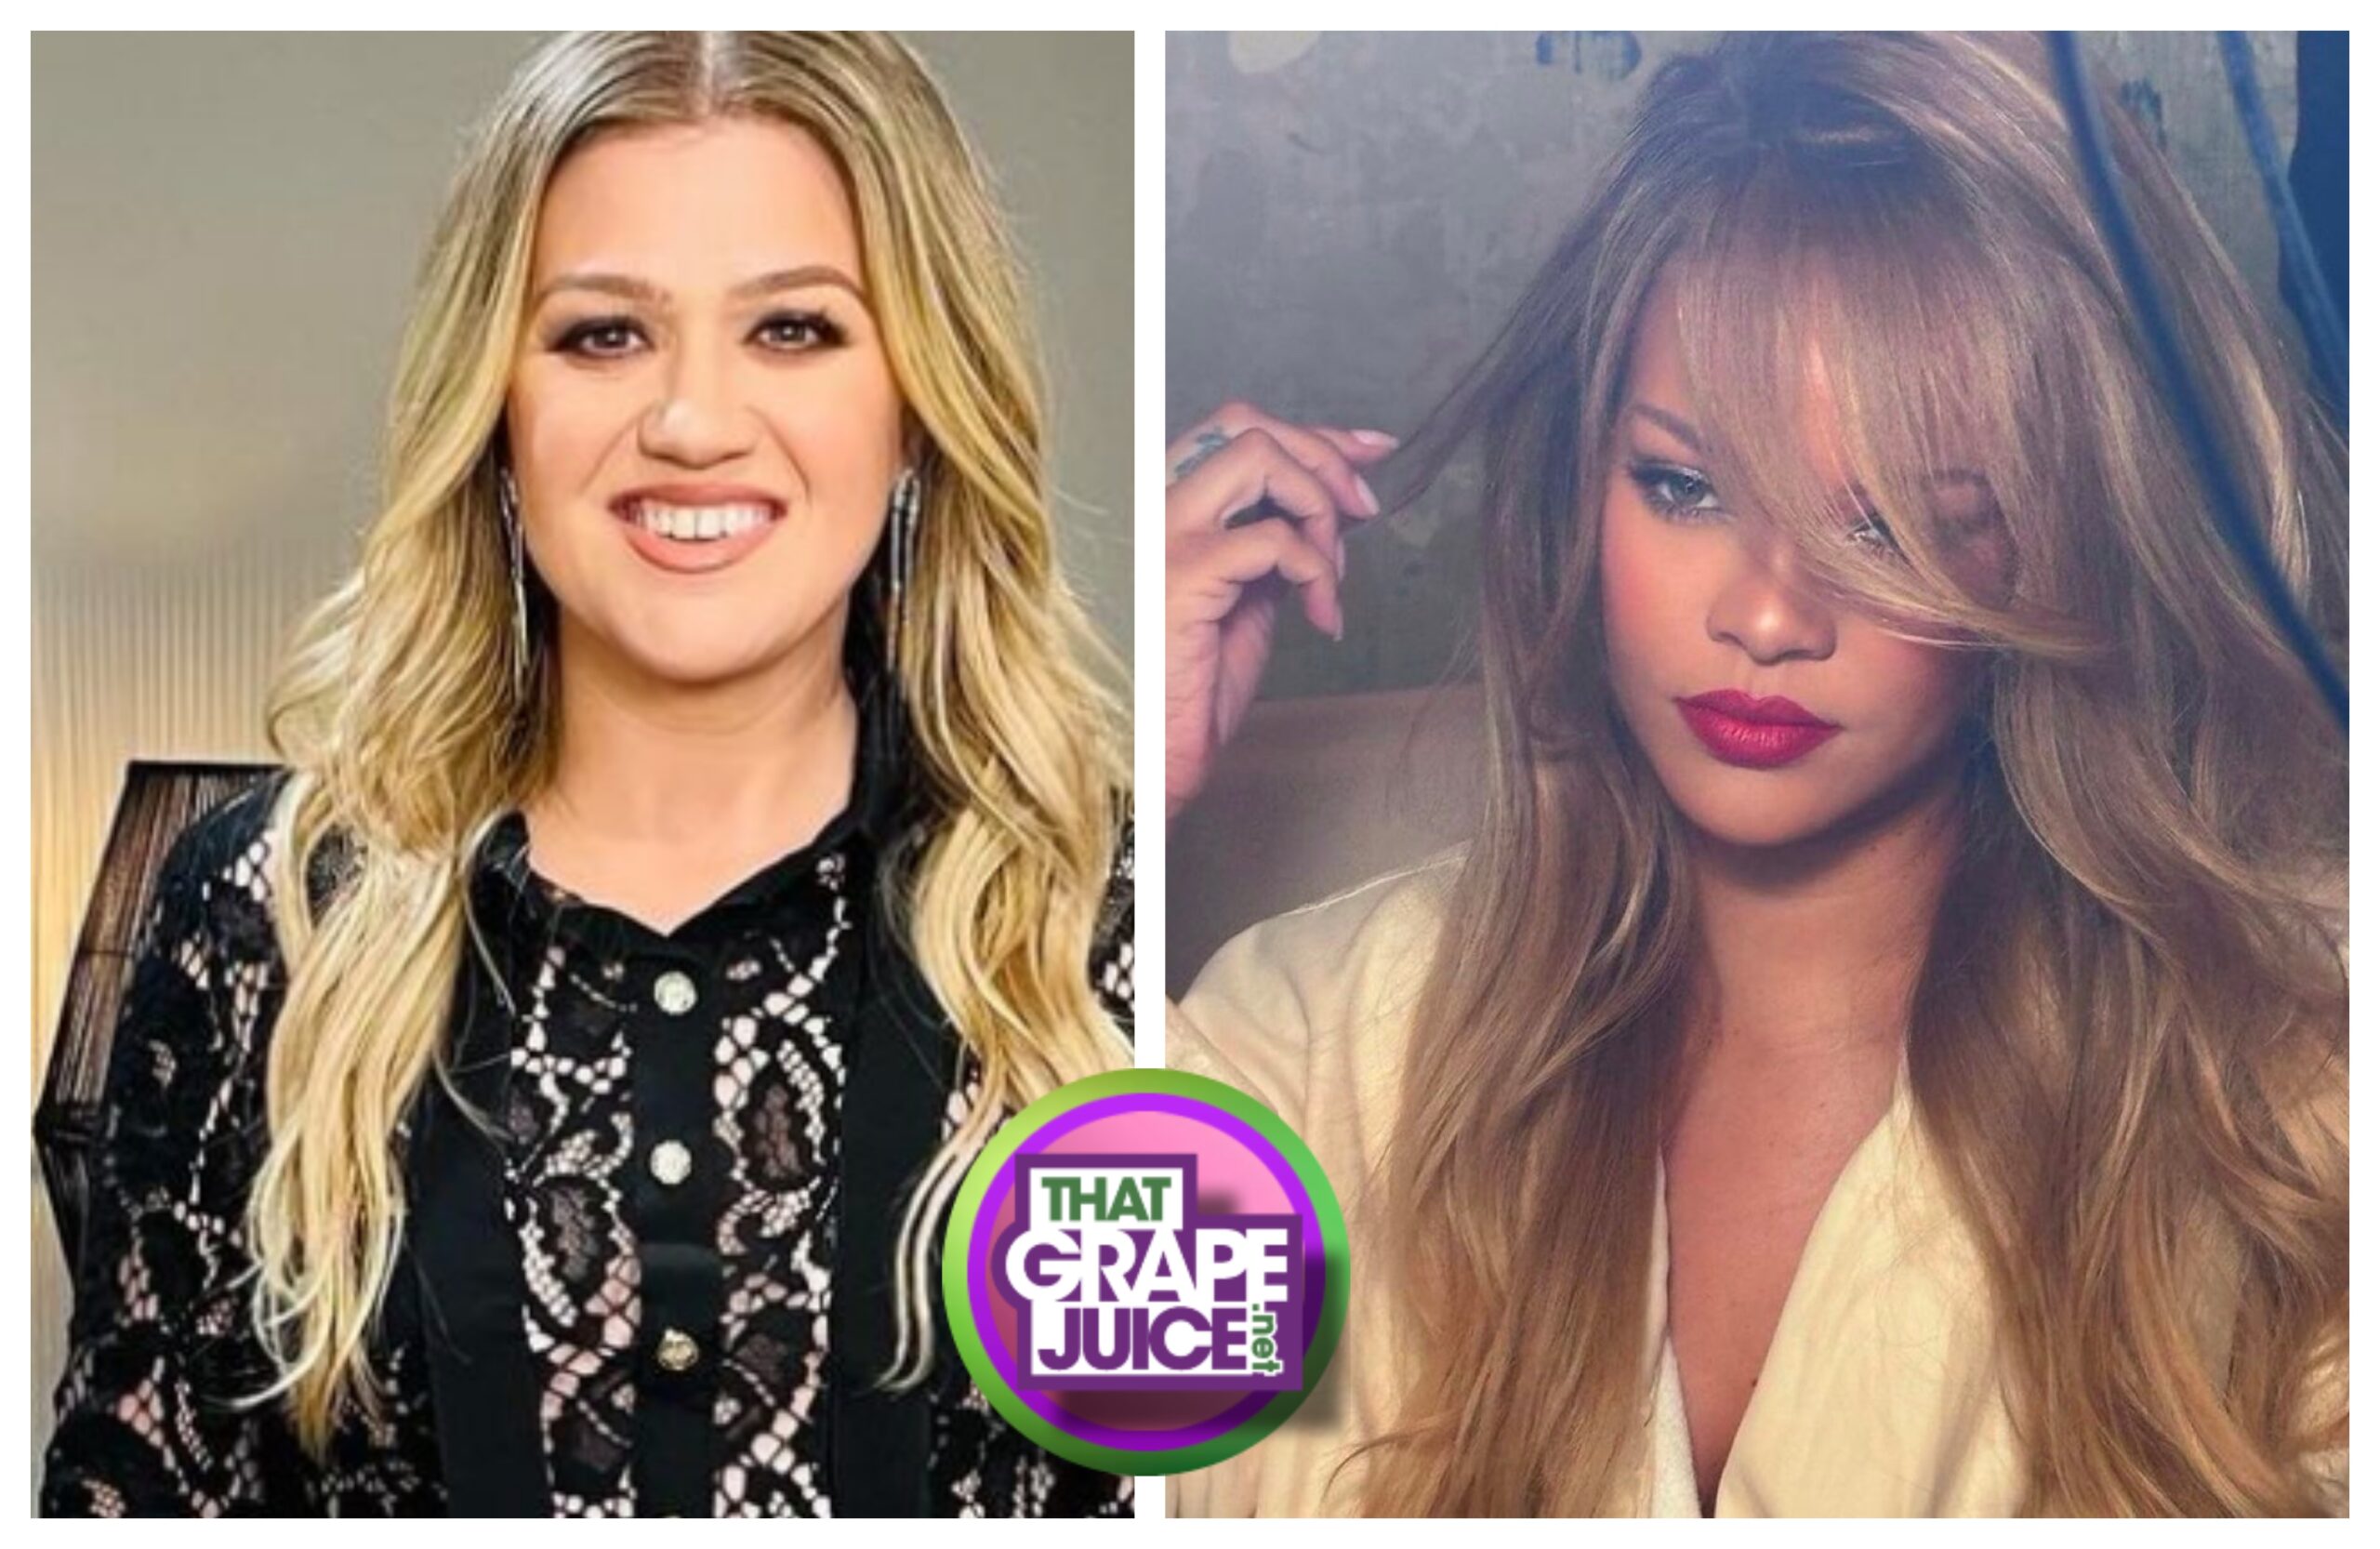 Report: Kelly Clarkson Claims Ex-Husband Told Her She Wasn’t “Sexy” Like Rihanna